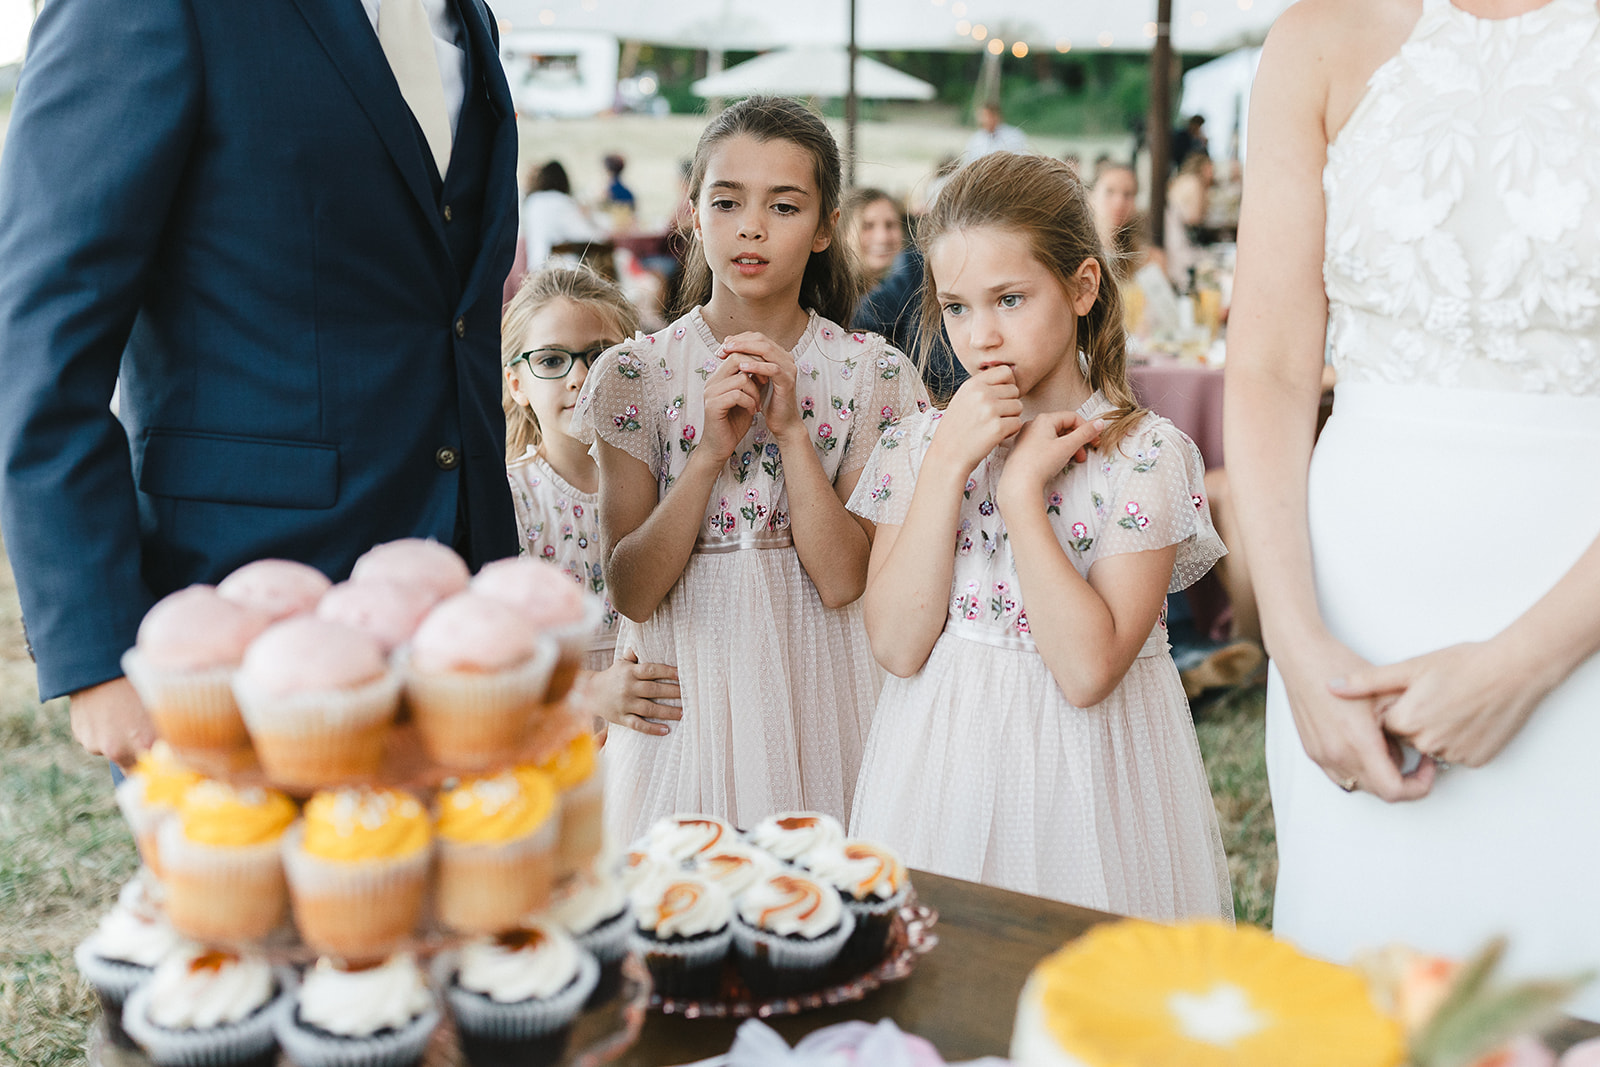 Flower girls looking at a dessert table full of cupcakes and sweets.